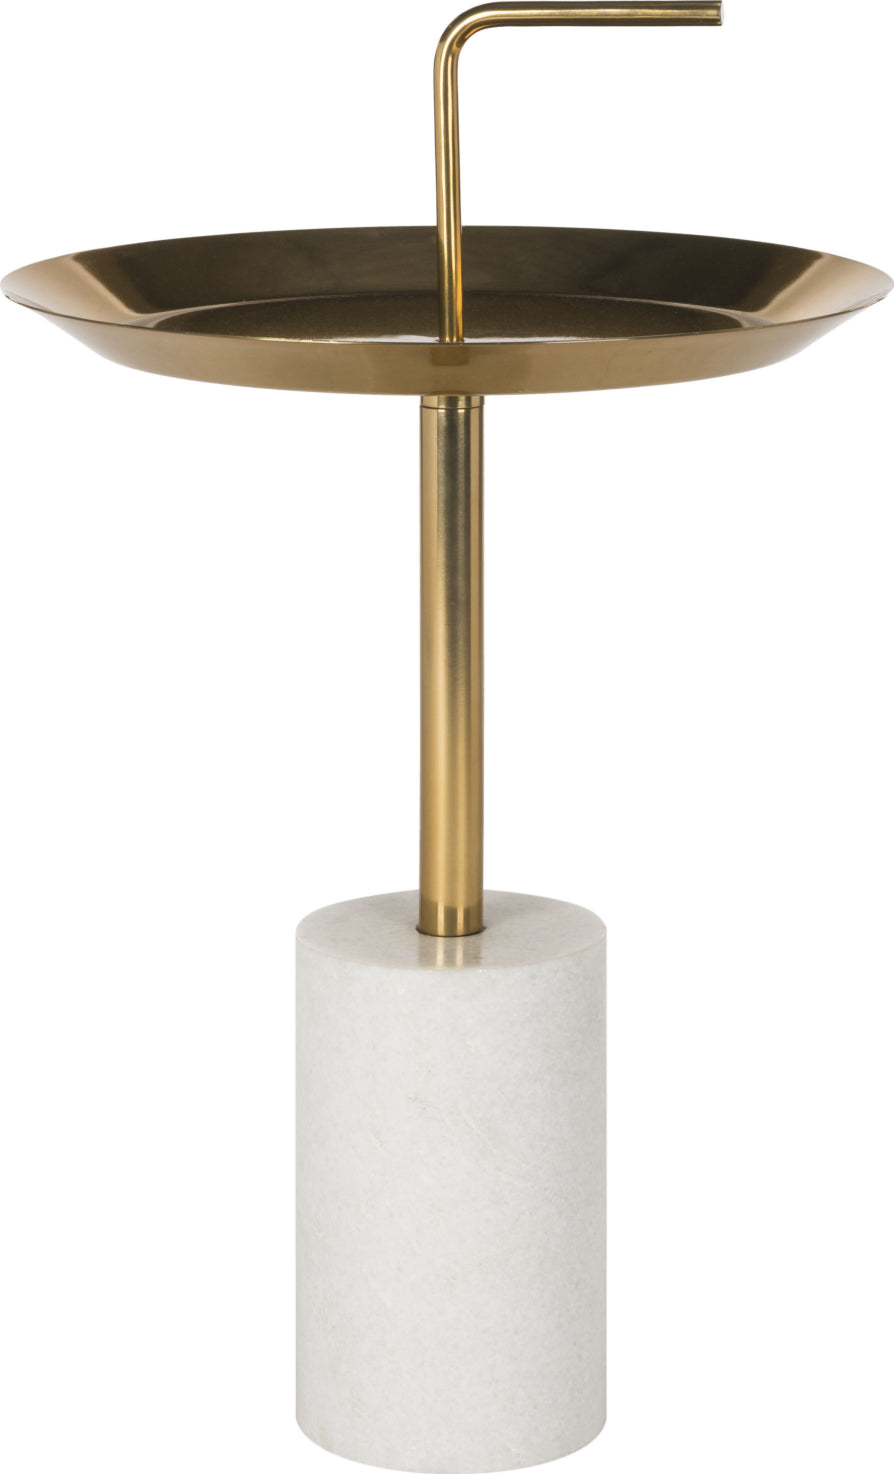 Safavieh Apollo Round Brass Top Side Table and Marble Furniture main image